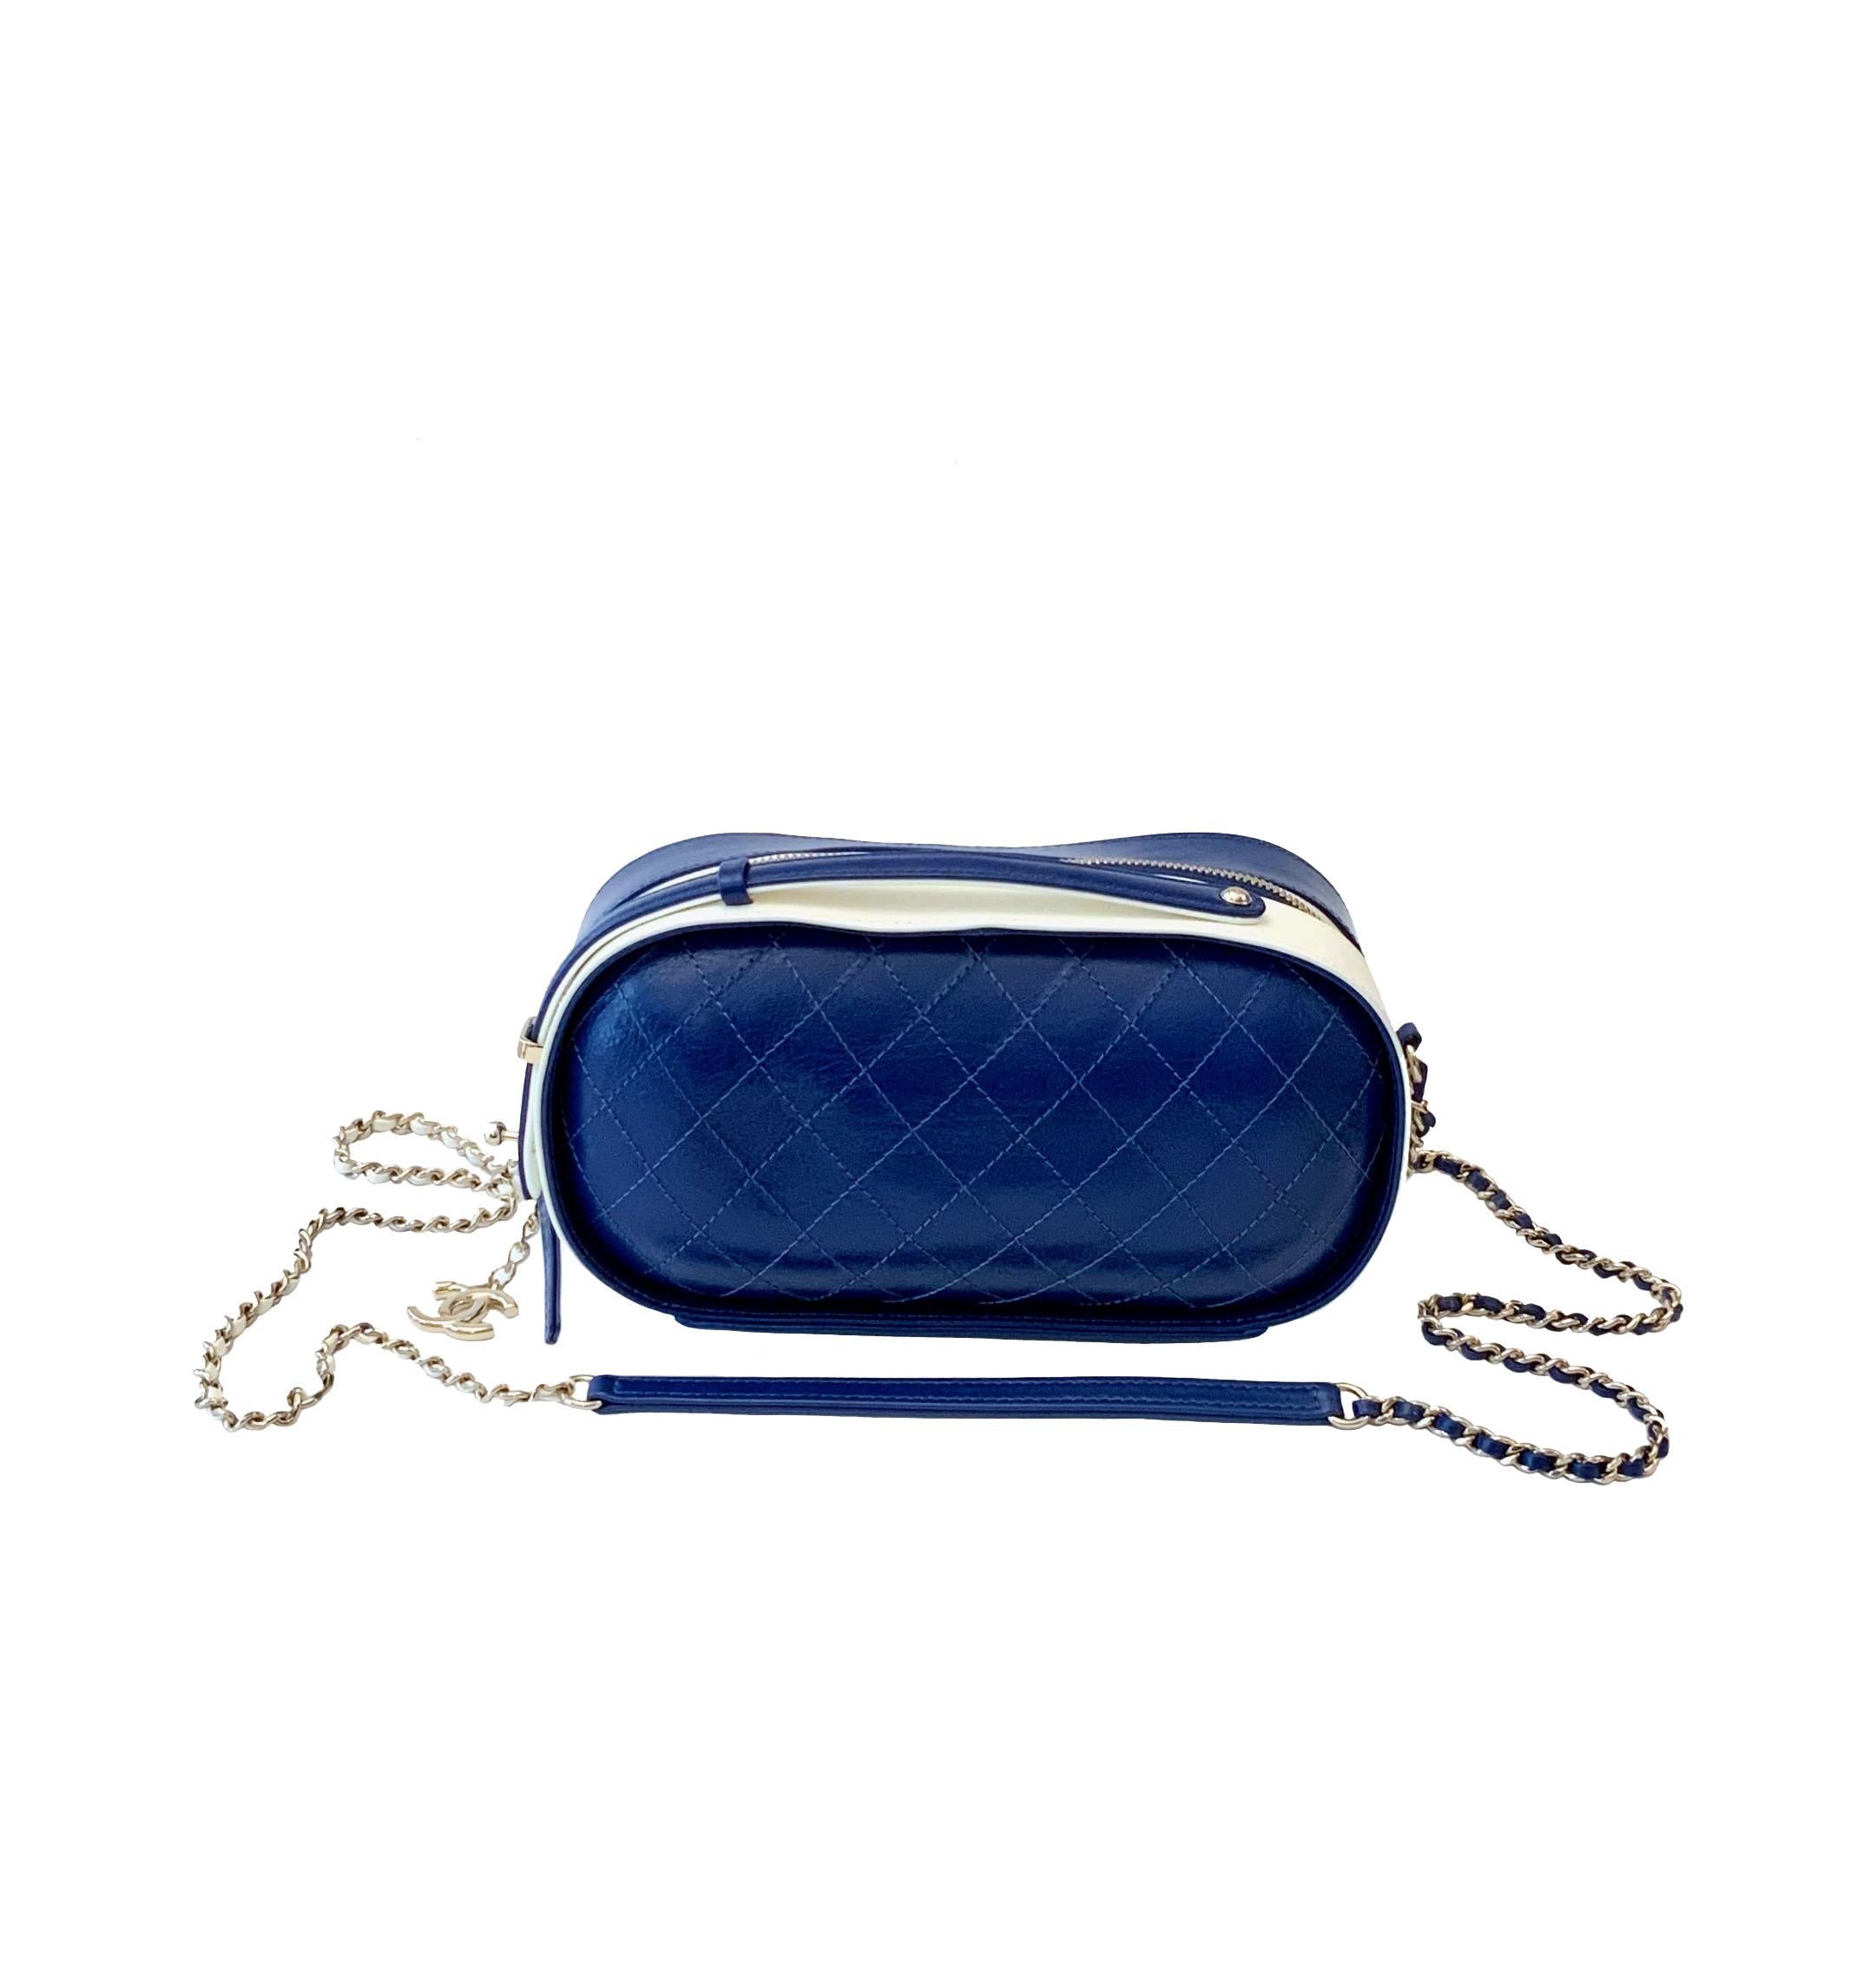 This pre-owned Vanity Case from the Nautical-Inspired Cruise 2019 Chanel collection features one side in white quilted crumpled calskin and the other side in blue. 

Collection: Nautical-Inspired Cruise 2019
Fabric: crumpled calfskin
Lining: blue